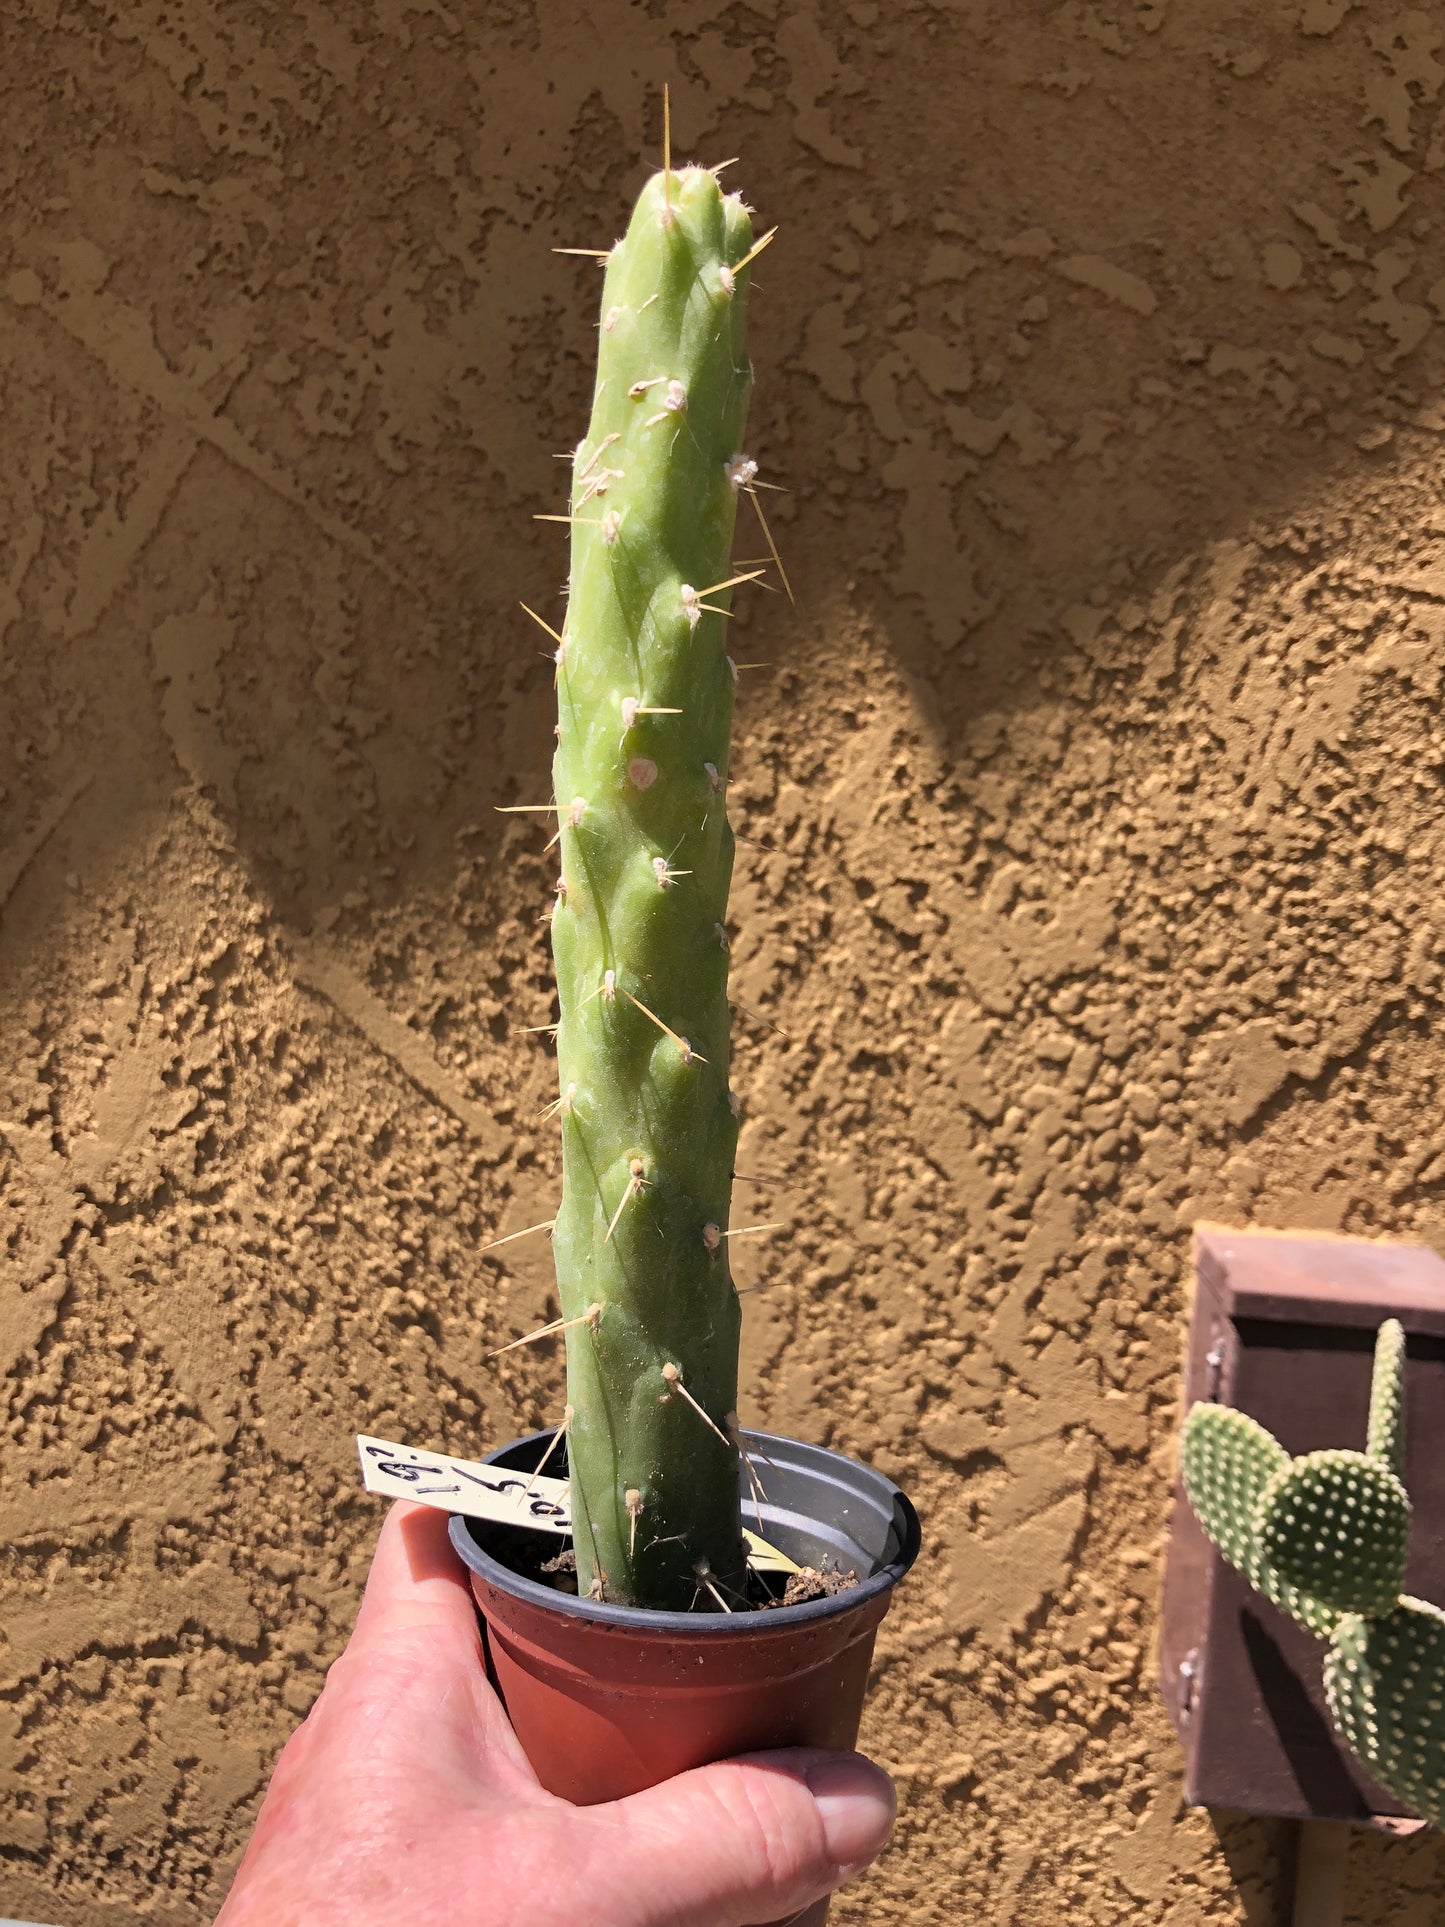 Austrocylindropuntia Full Size Eve's Needle 10.5"Tall #19Y